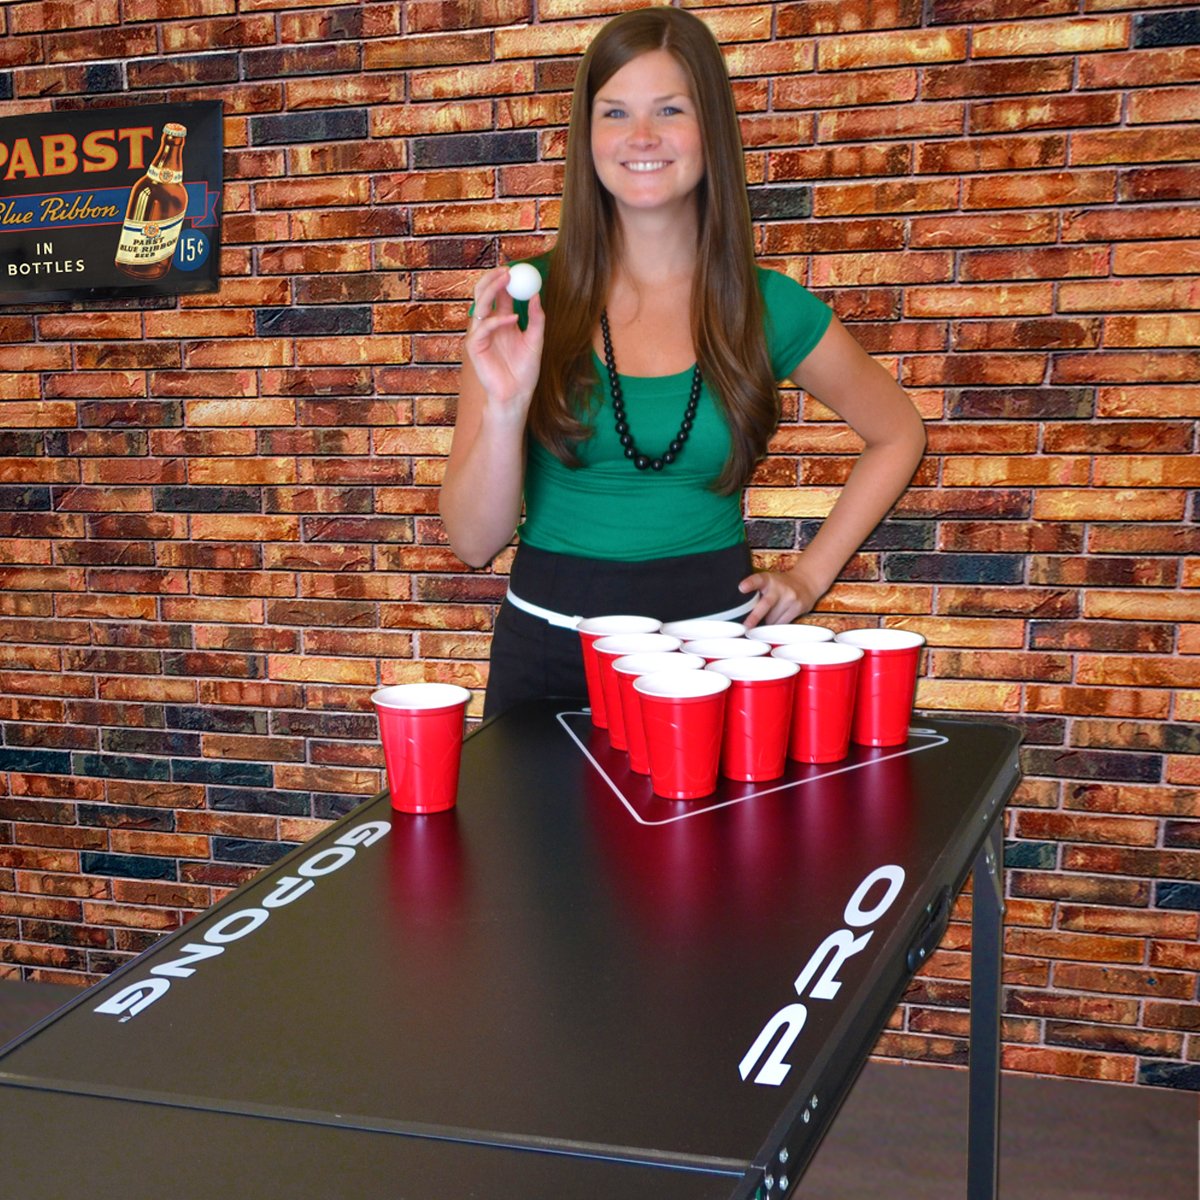 GoPong Beer Pong Table – 8 Foot Long – Tailgating Gear Store